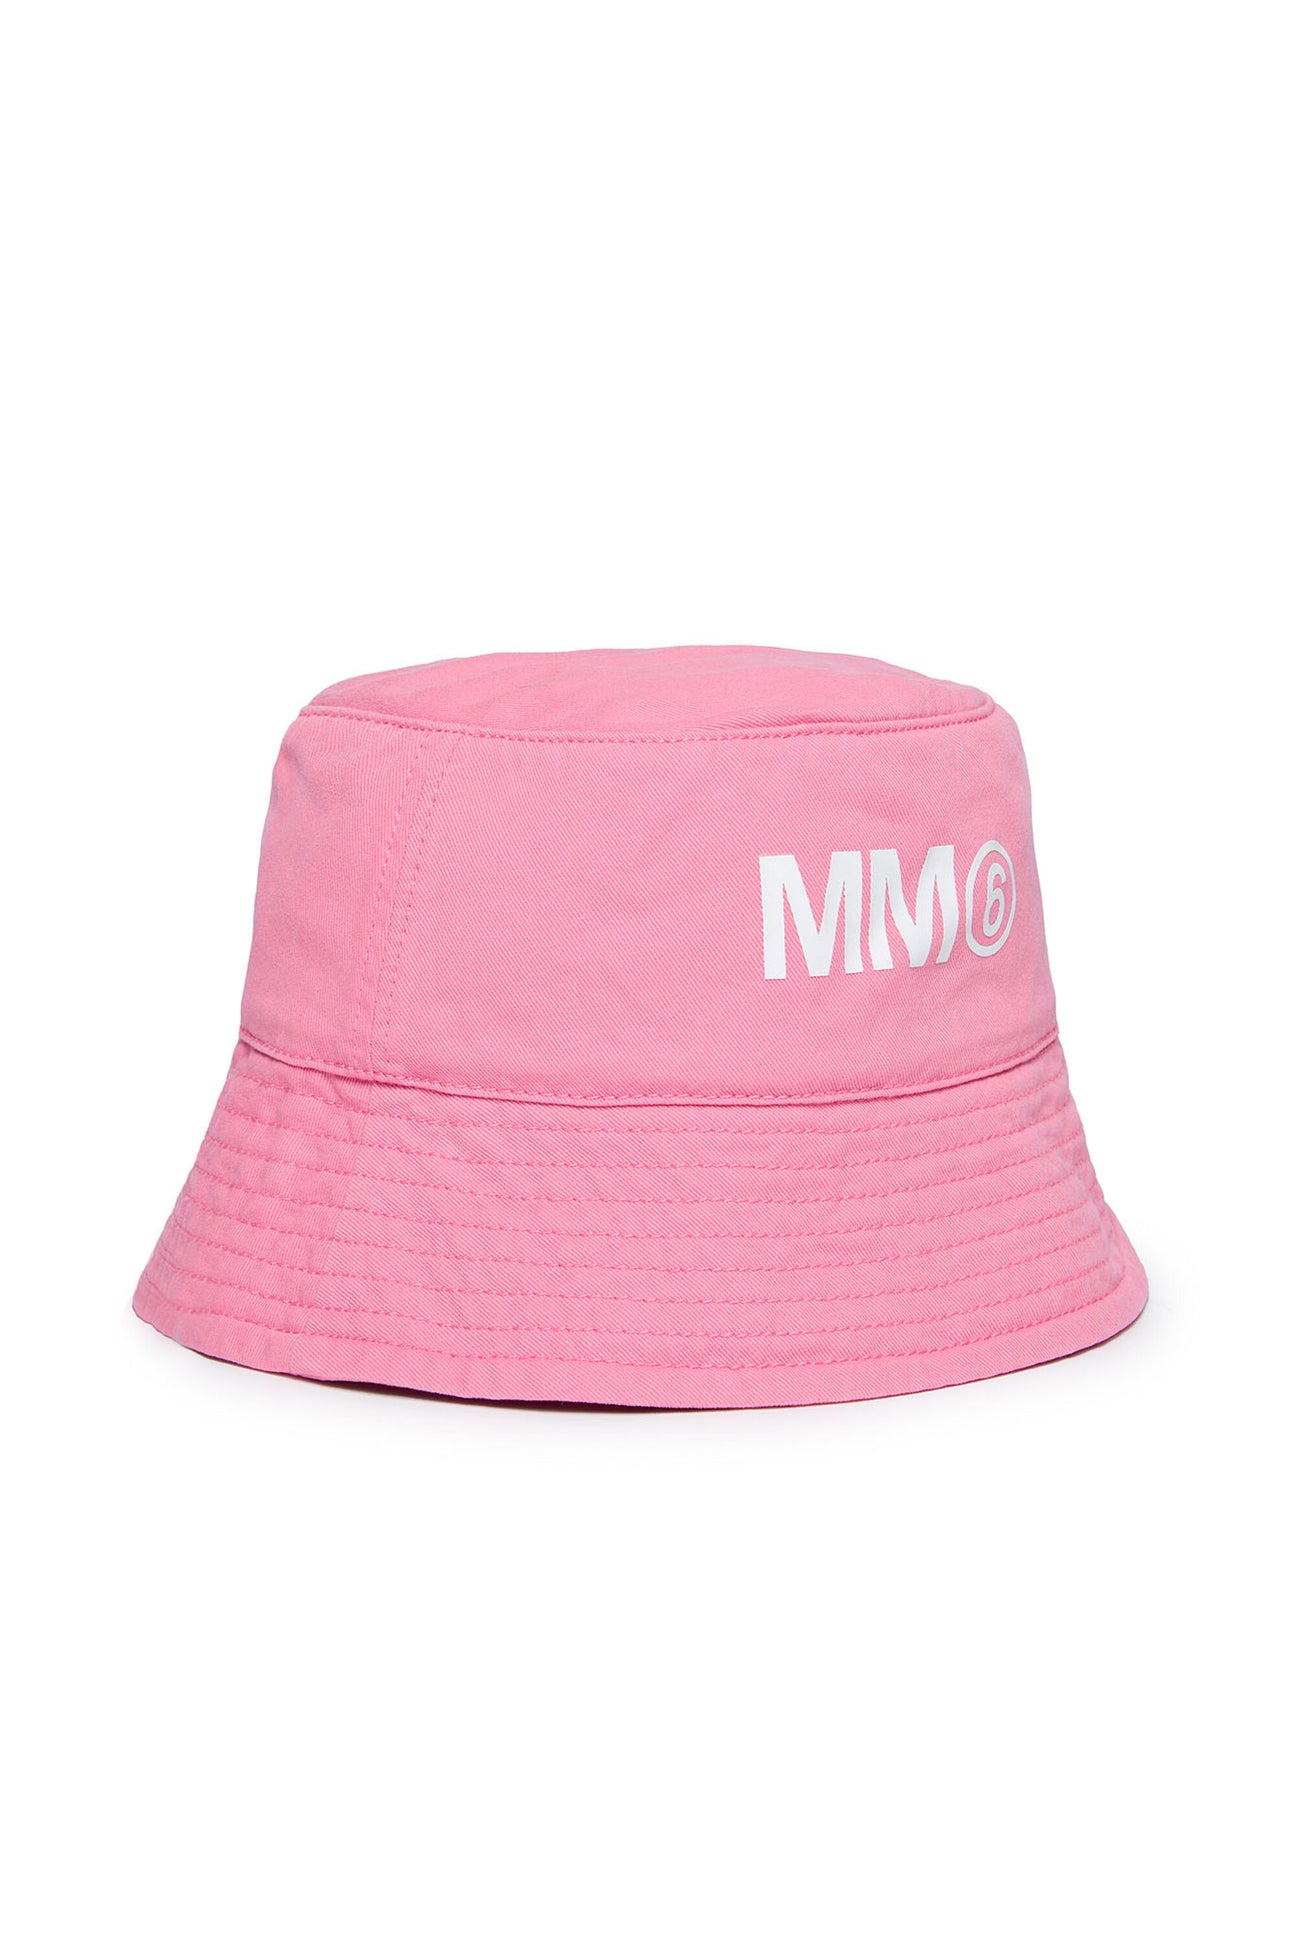 Fisherman hat with MM6 logo 